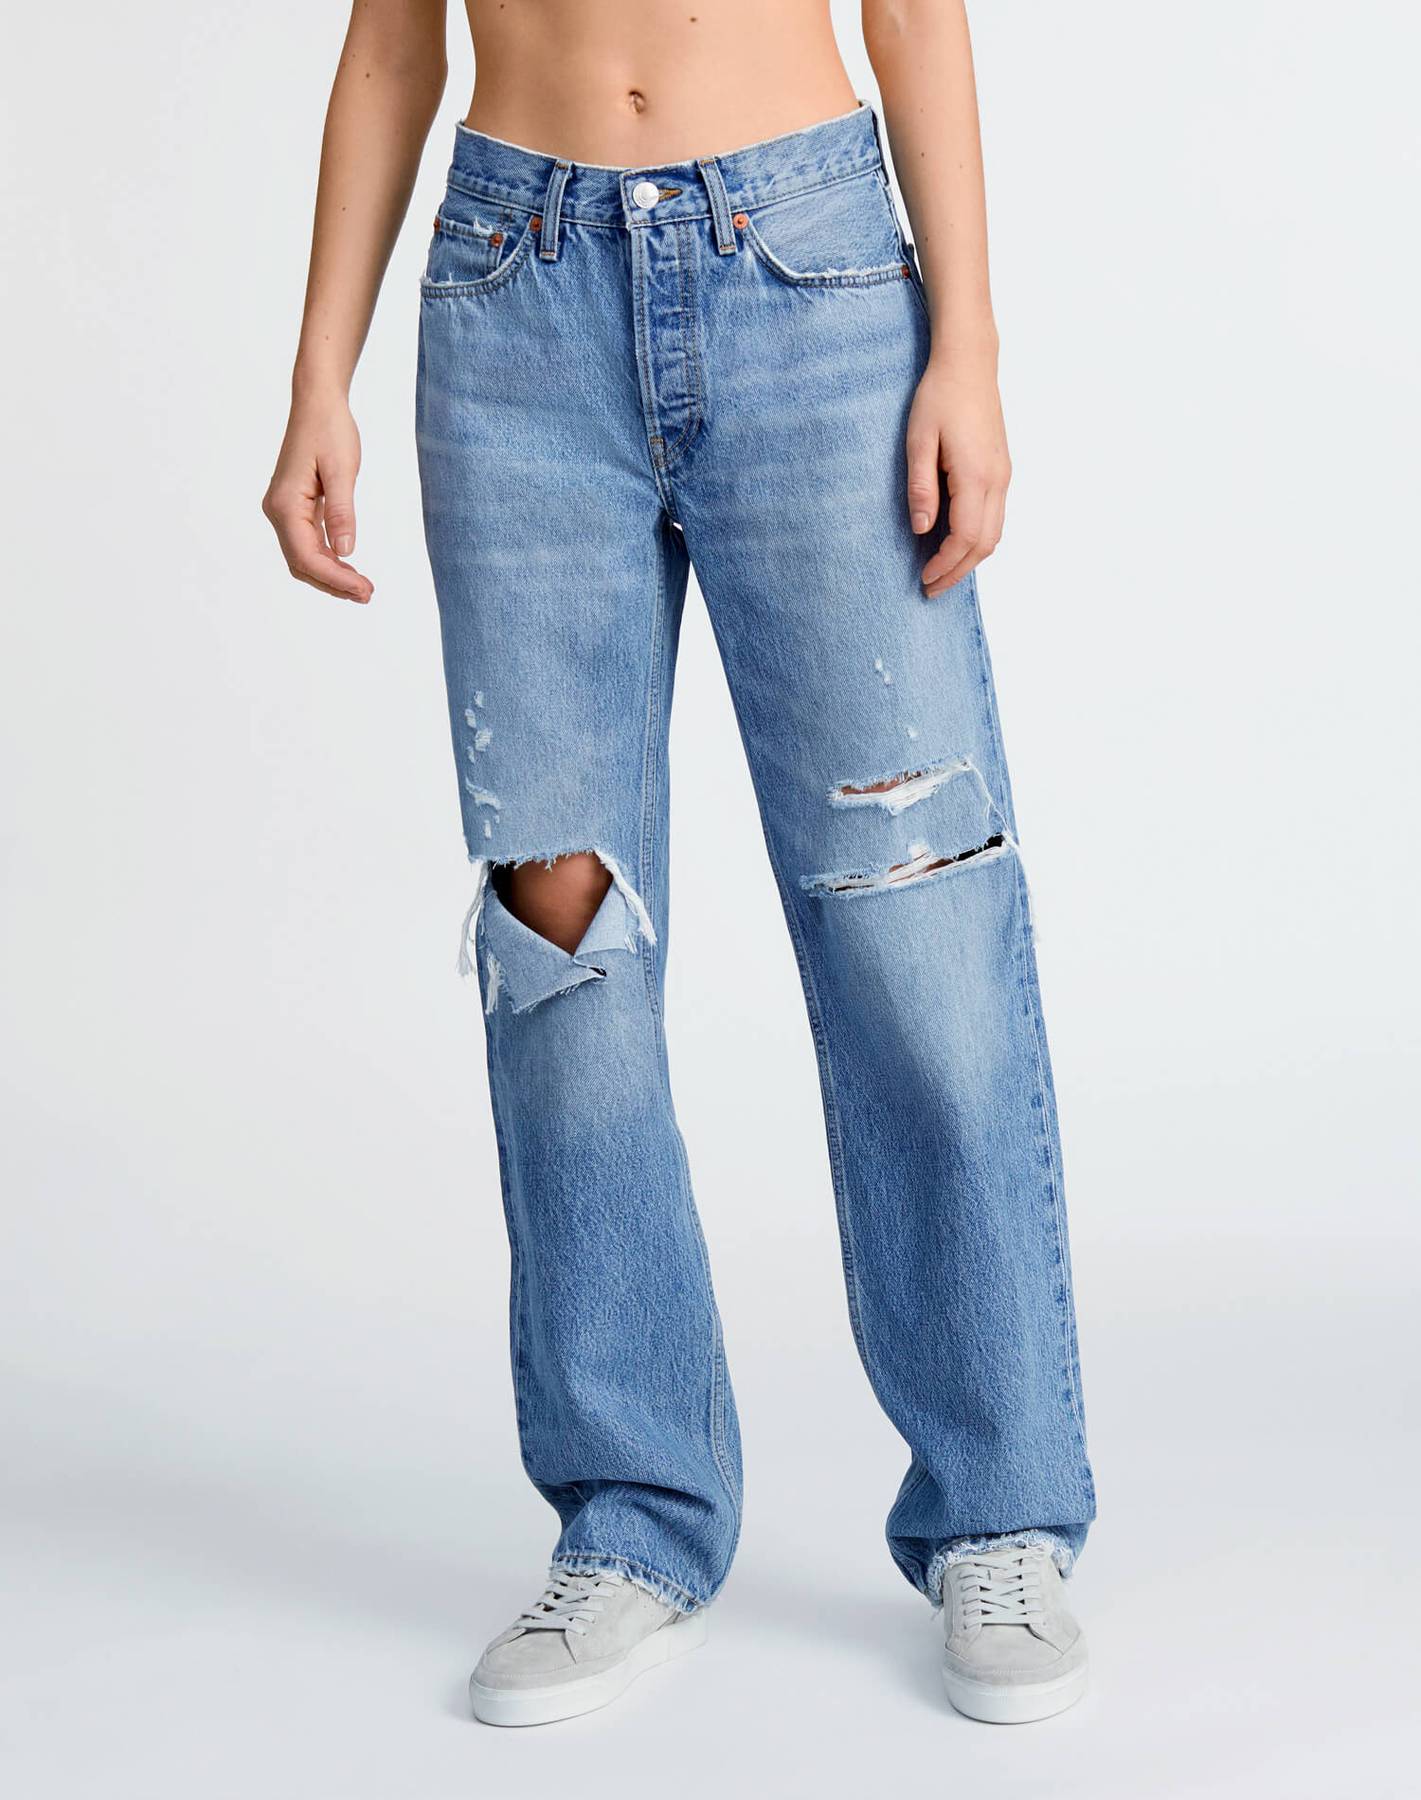 90s Comfy Jean in Sunfaded Destroy